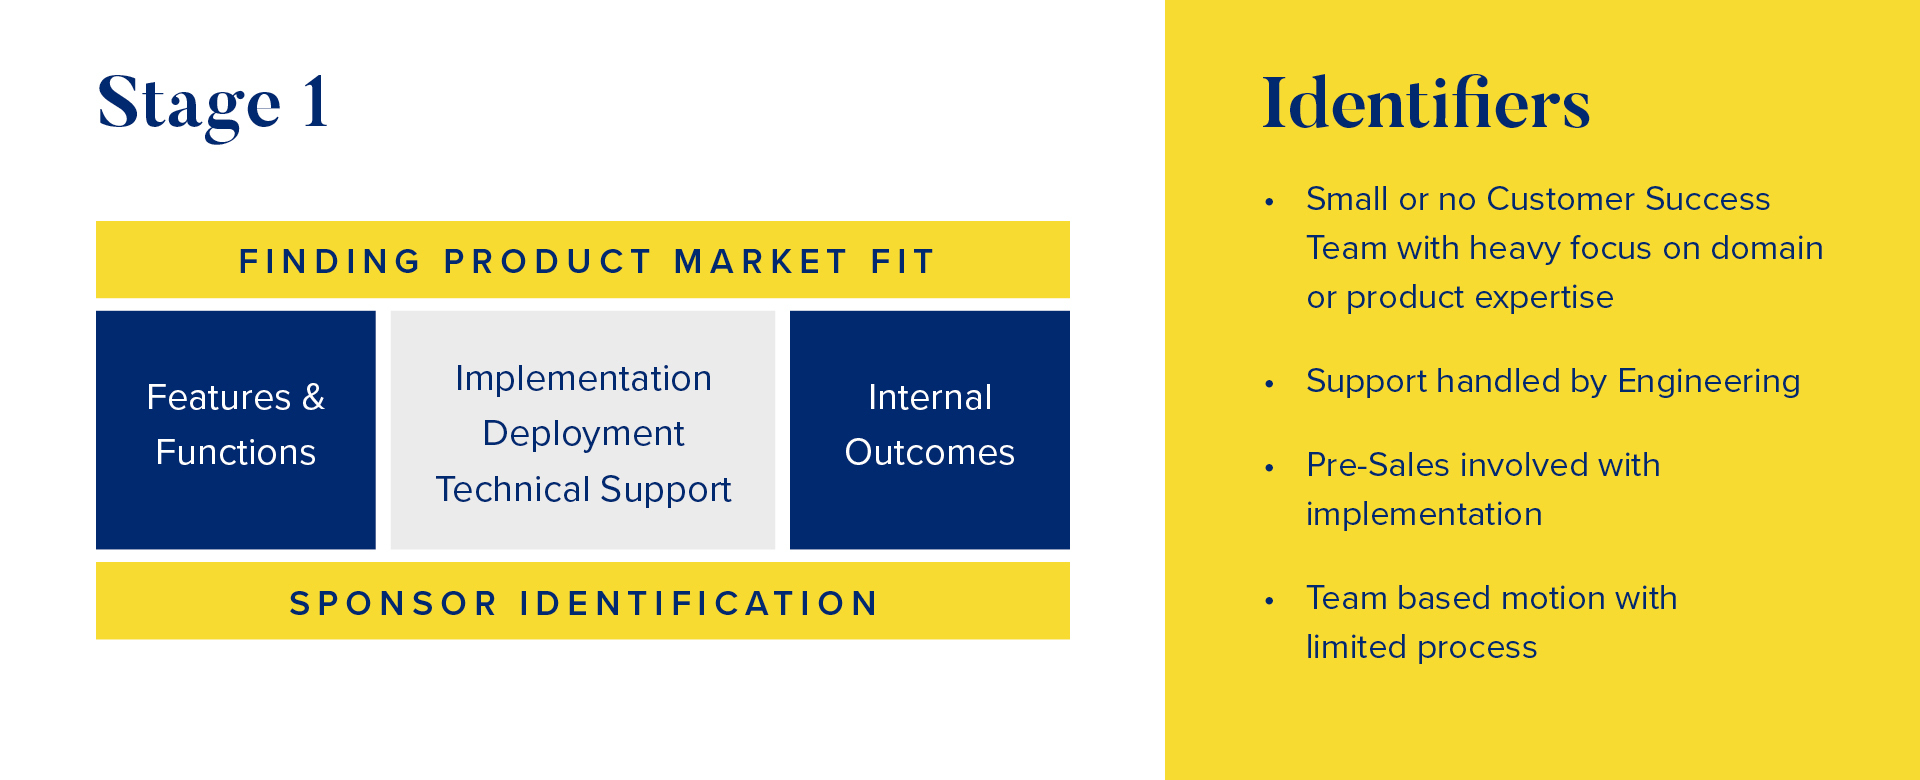 Finding Product Market Fit.
Identifiers: 
- small or no Customer Success Team with heavy focus on domain or product expertise 
- support handled by engineering 
- pre-sales involved with implementation
- team based motion with limited process 